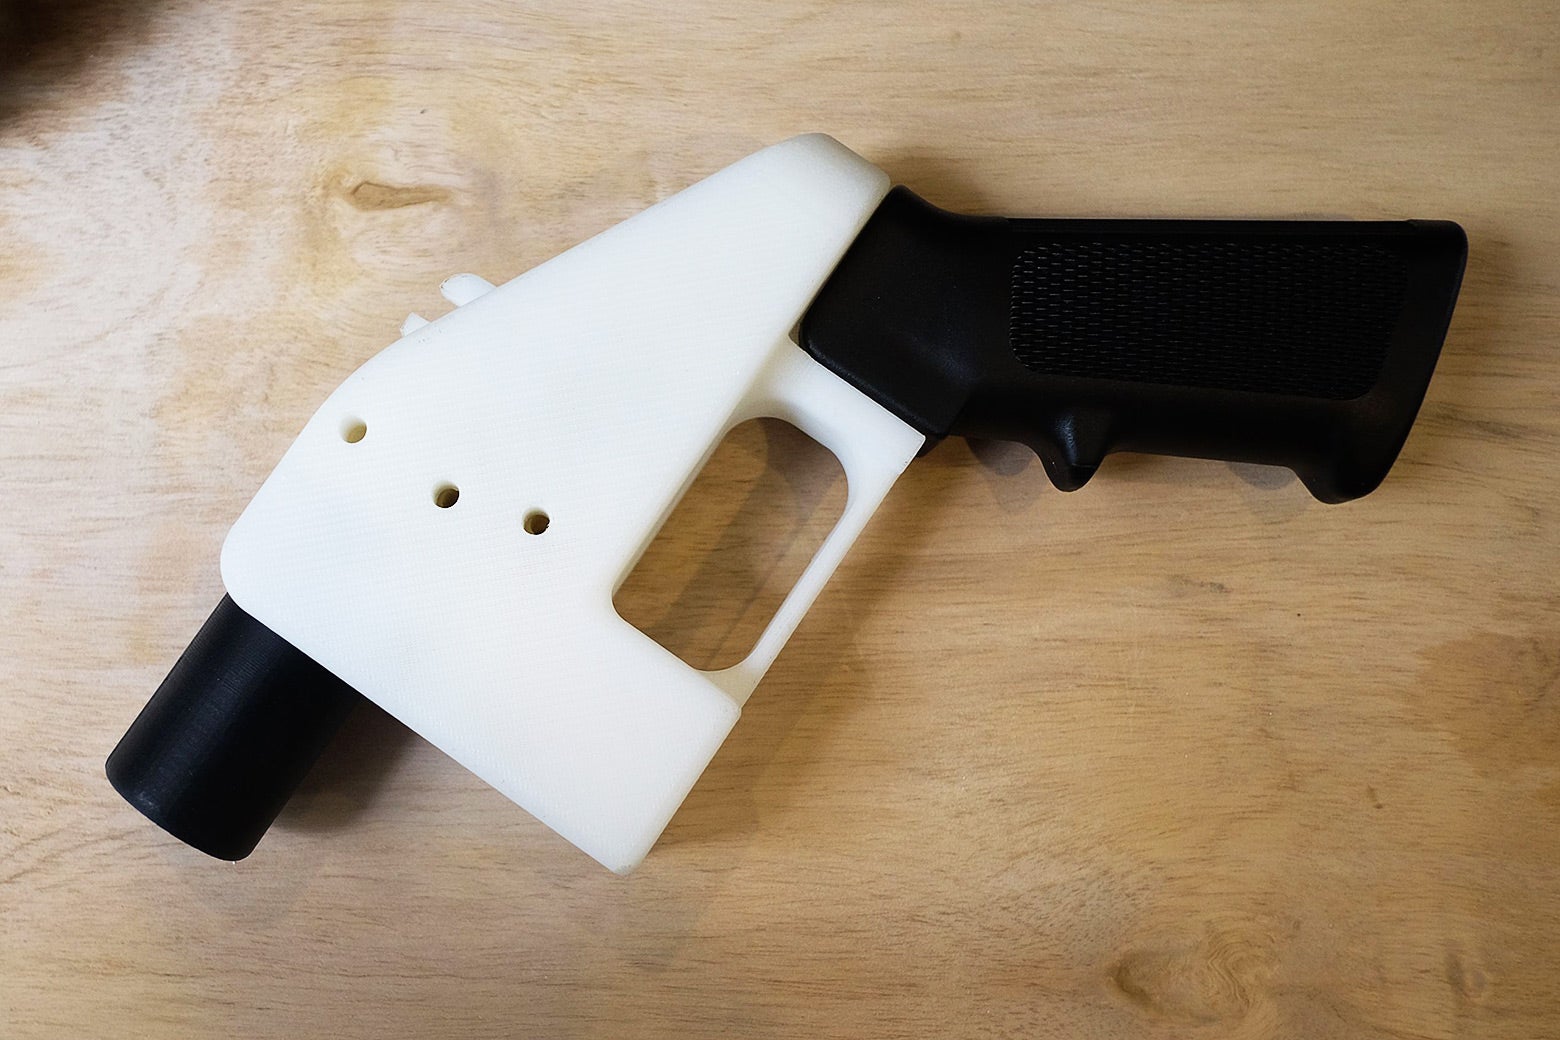 A 3D-printed gun called the Liberator is seen at a factory in Austin, Texas on Wednesday.